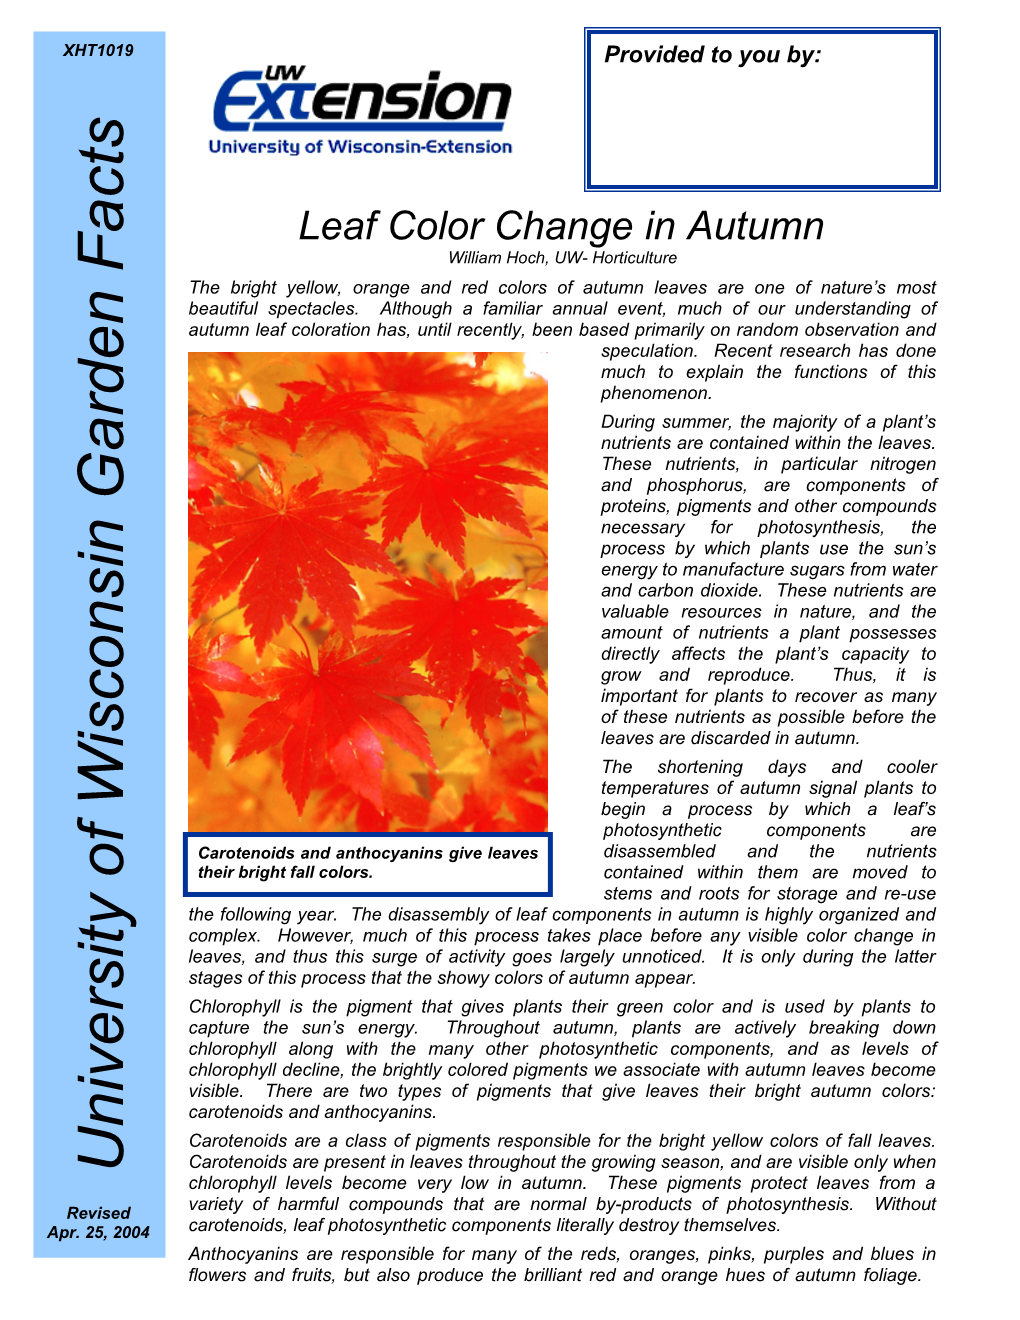 Leafcolor Change in Autumn